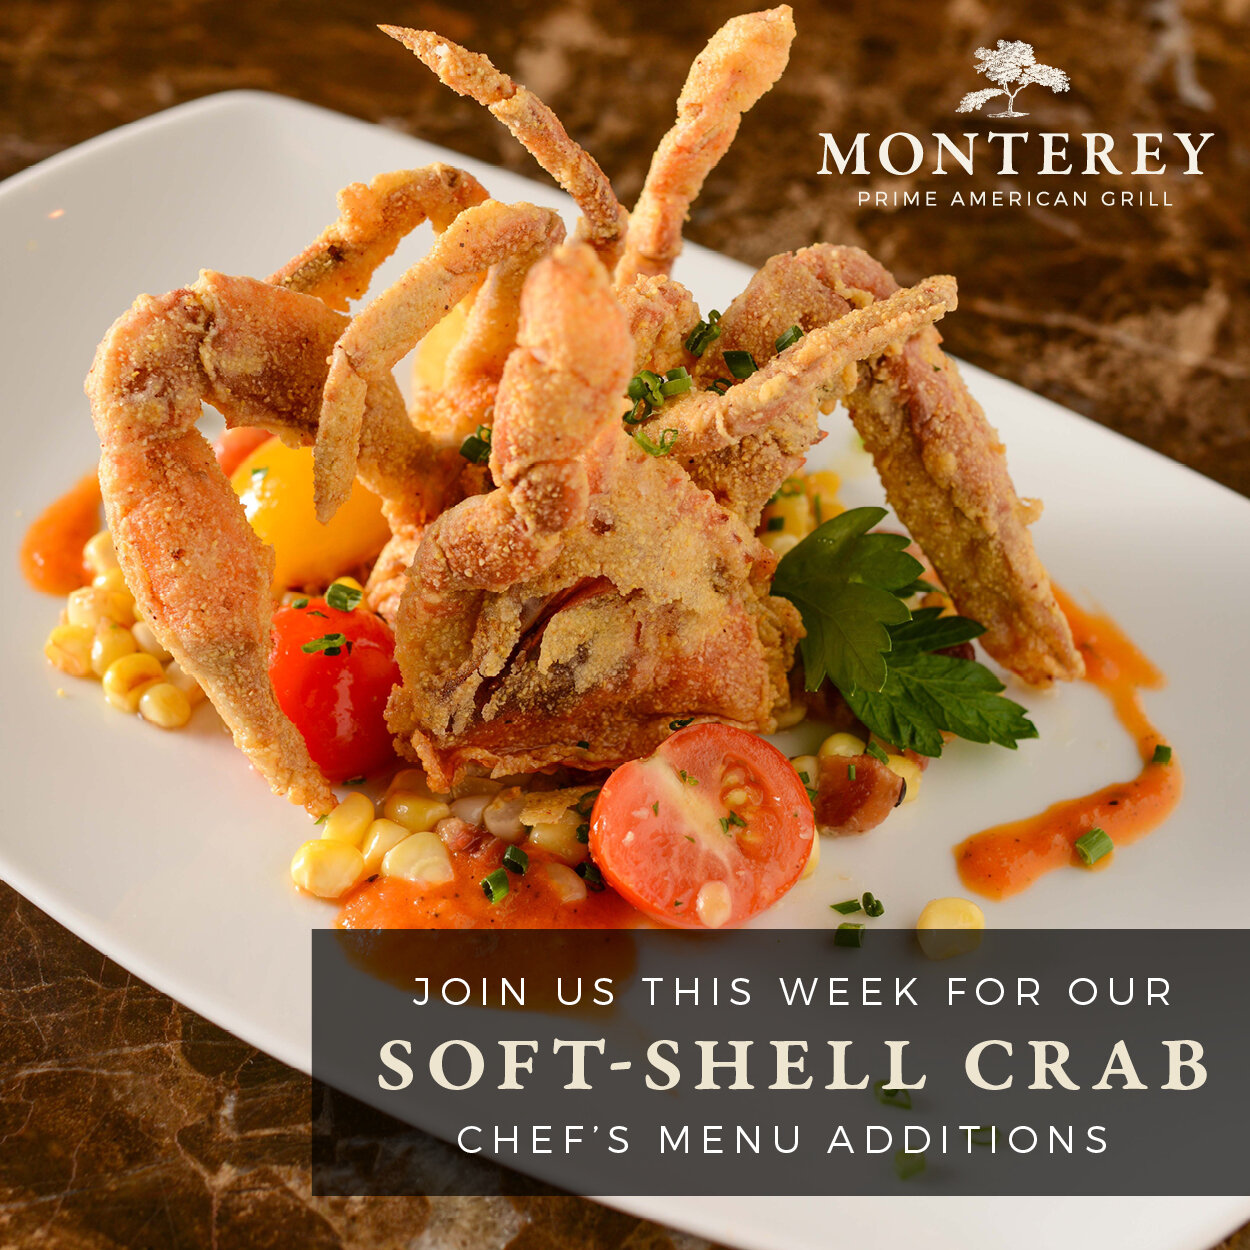 It's soft shell crab season - and we've got them! 🦀 Don't miss our delicious features this weekend while they last, from Executive Chef Andrew Pearce!